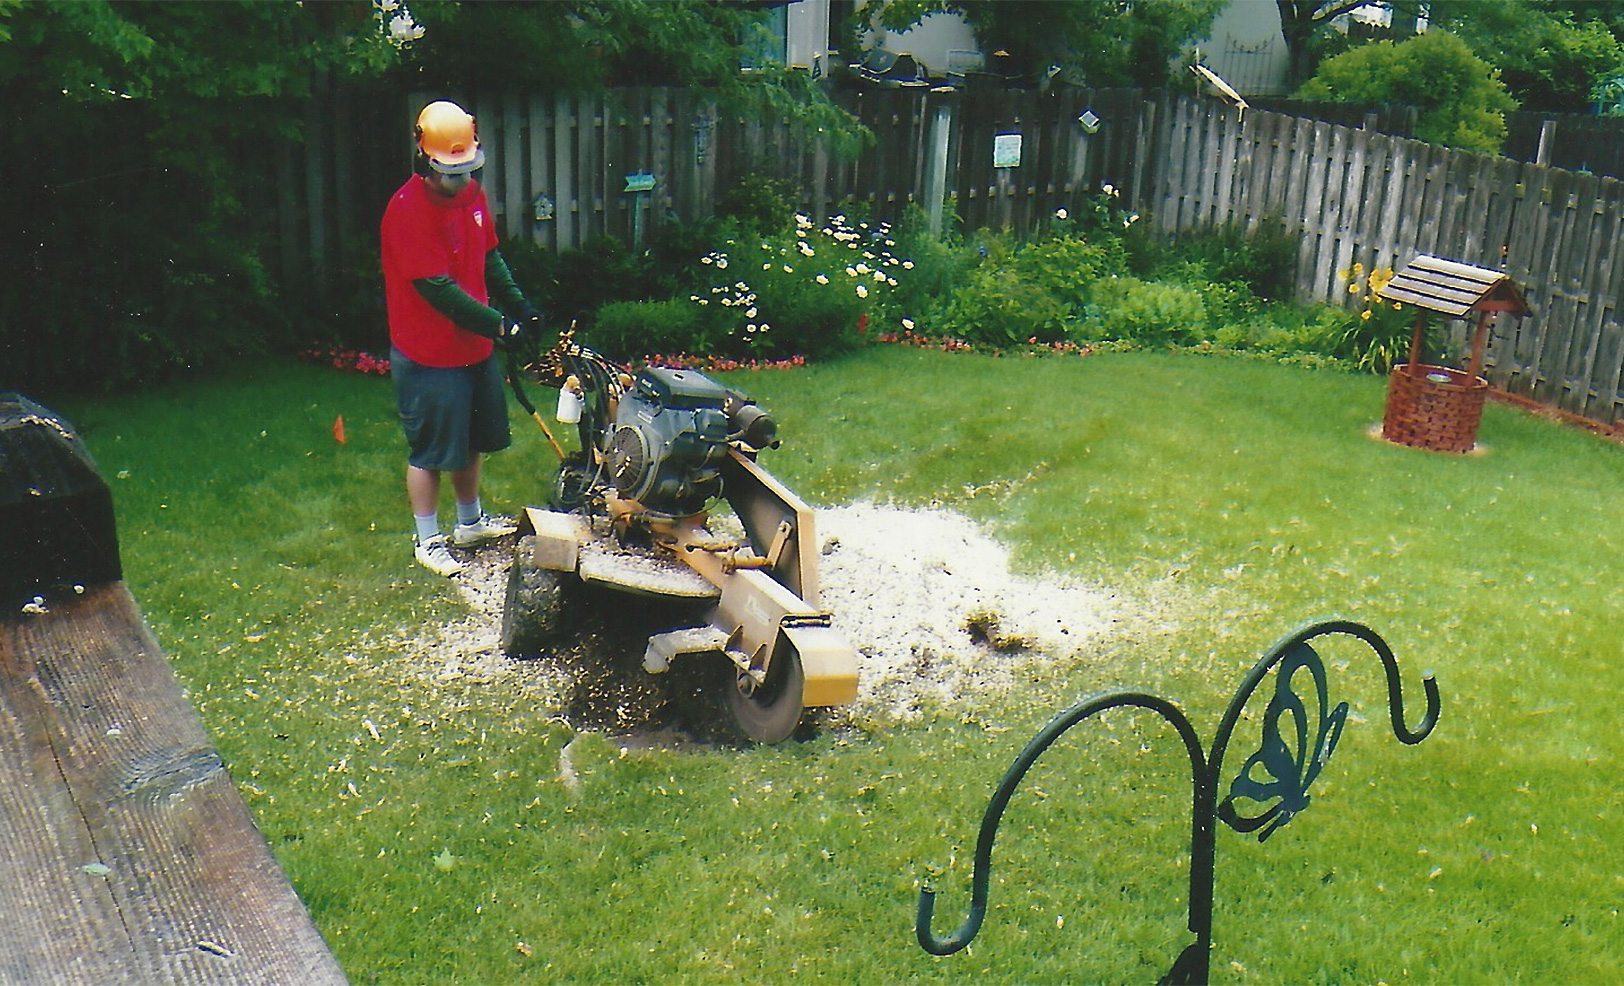 Grinding a stump in a back yard